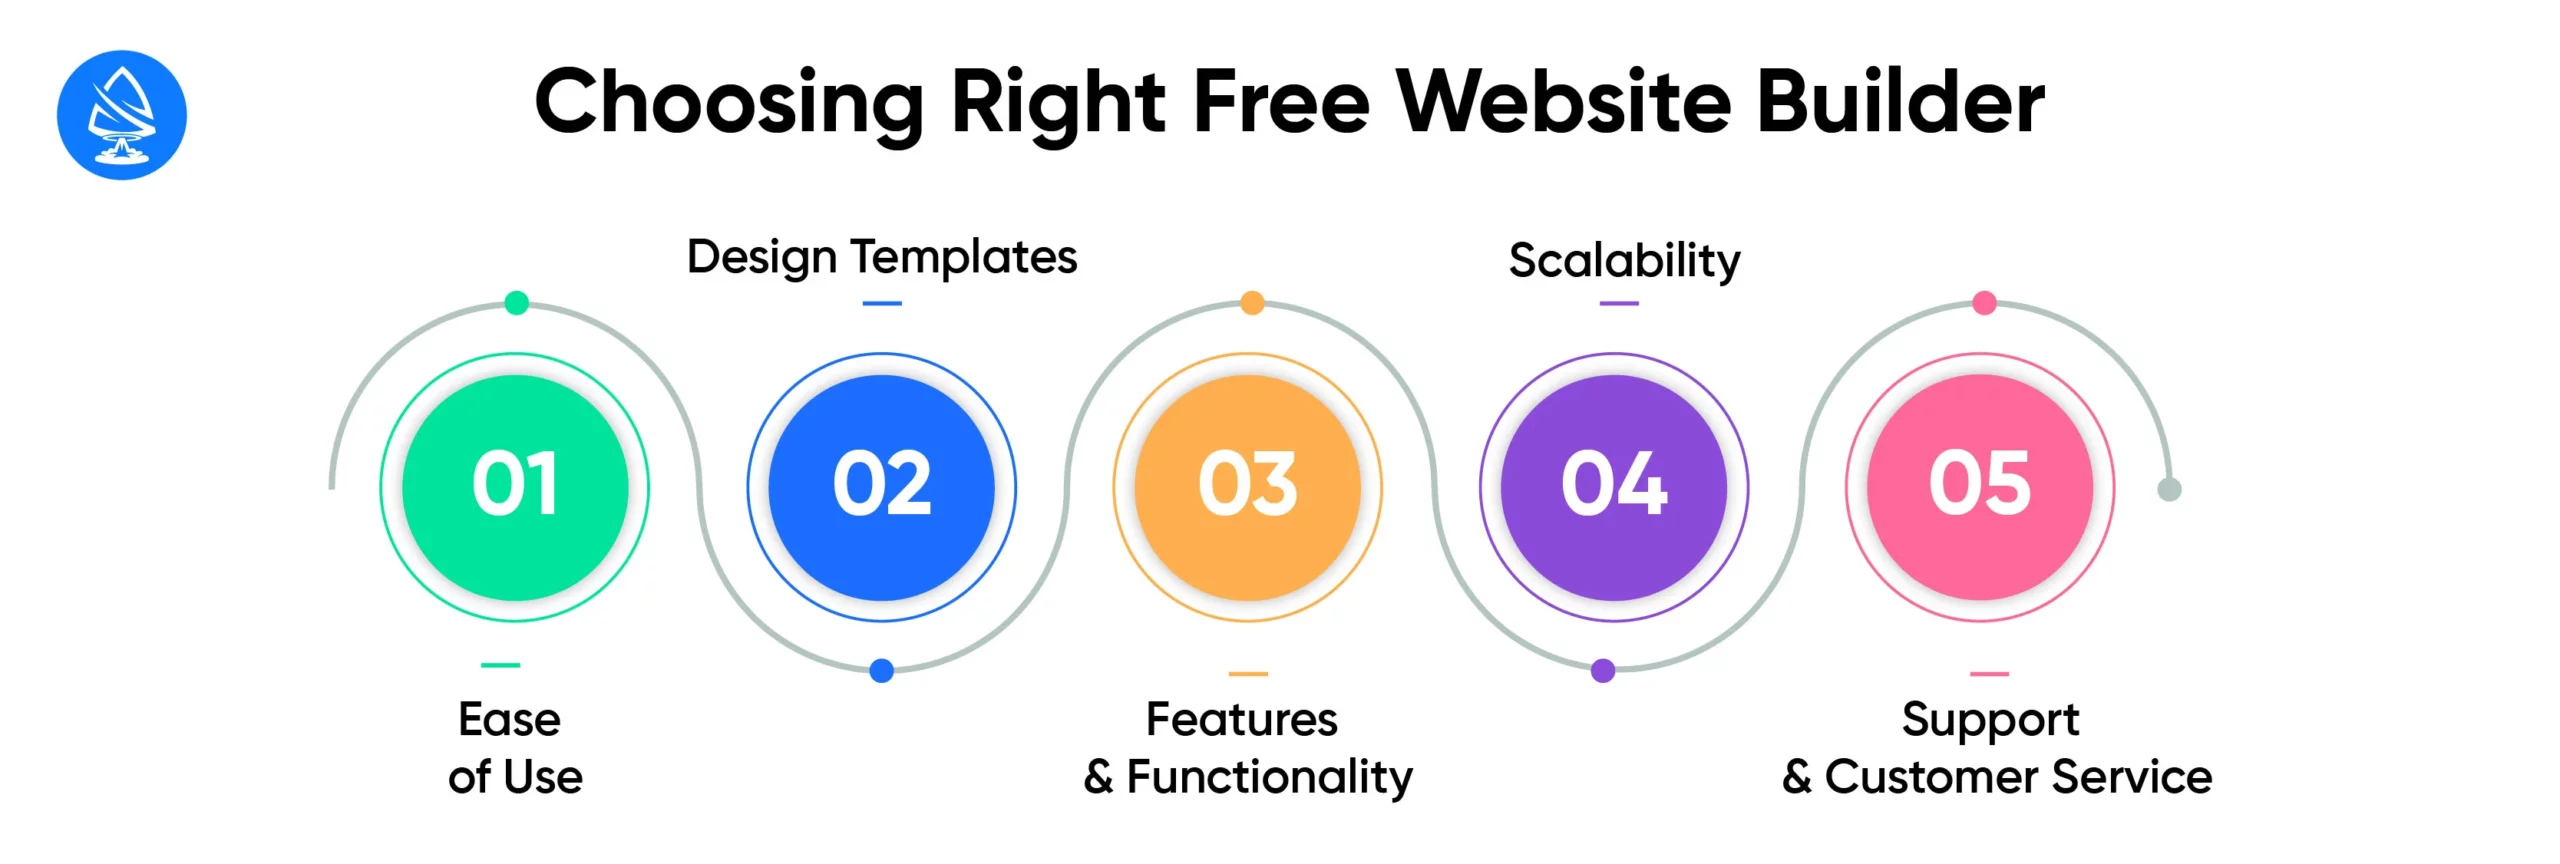 Factors to consider when choosing a completely free site builder: 